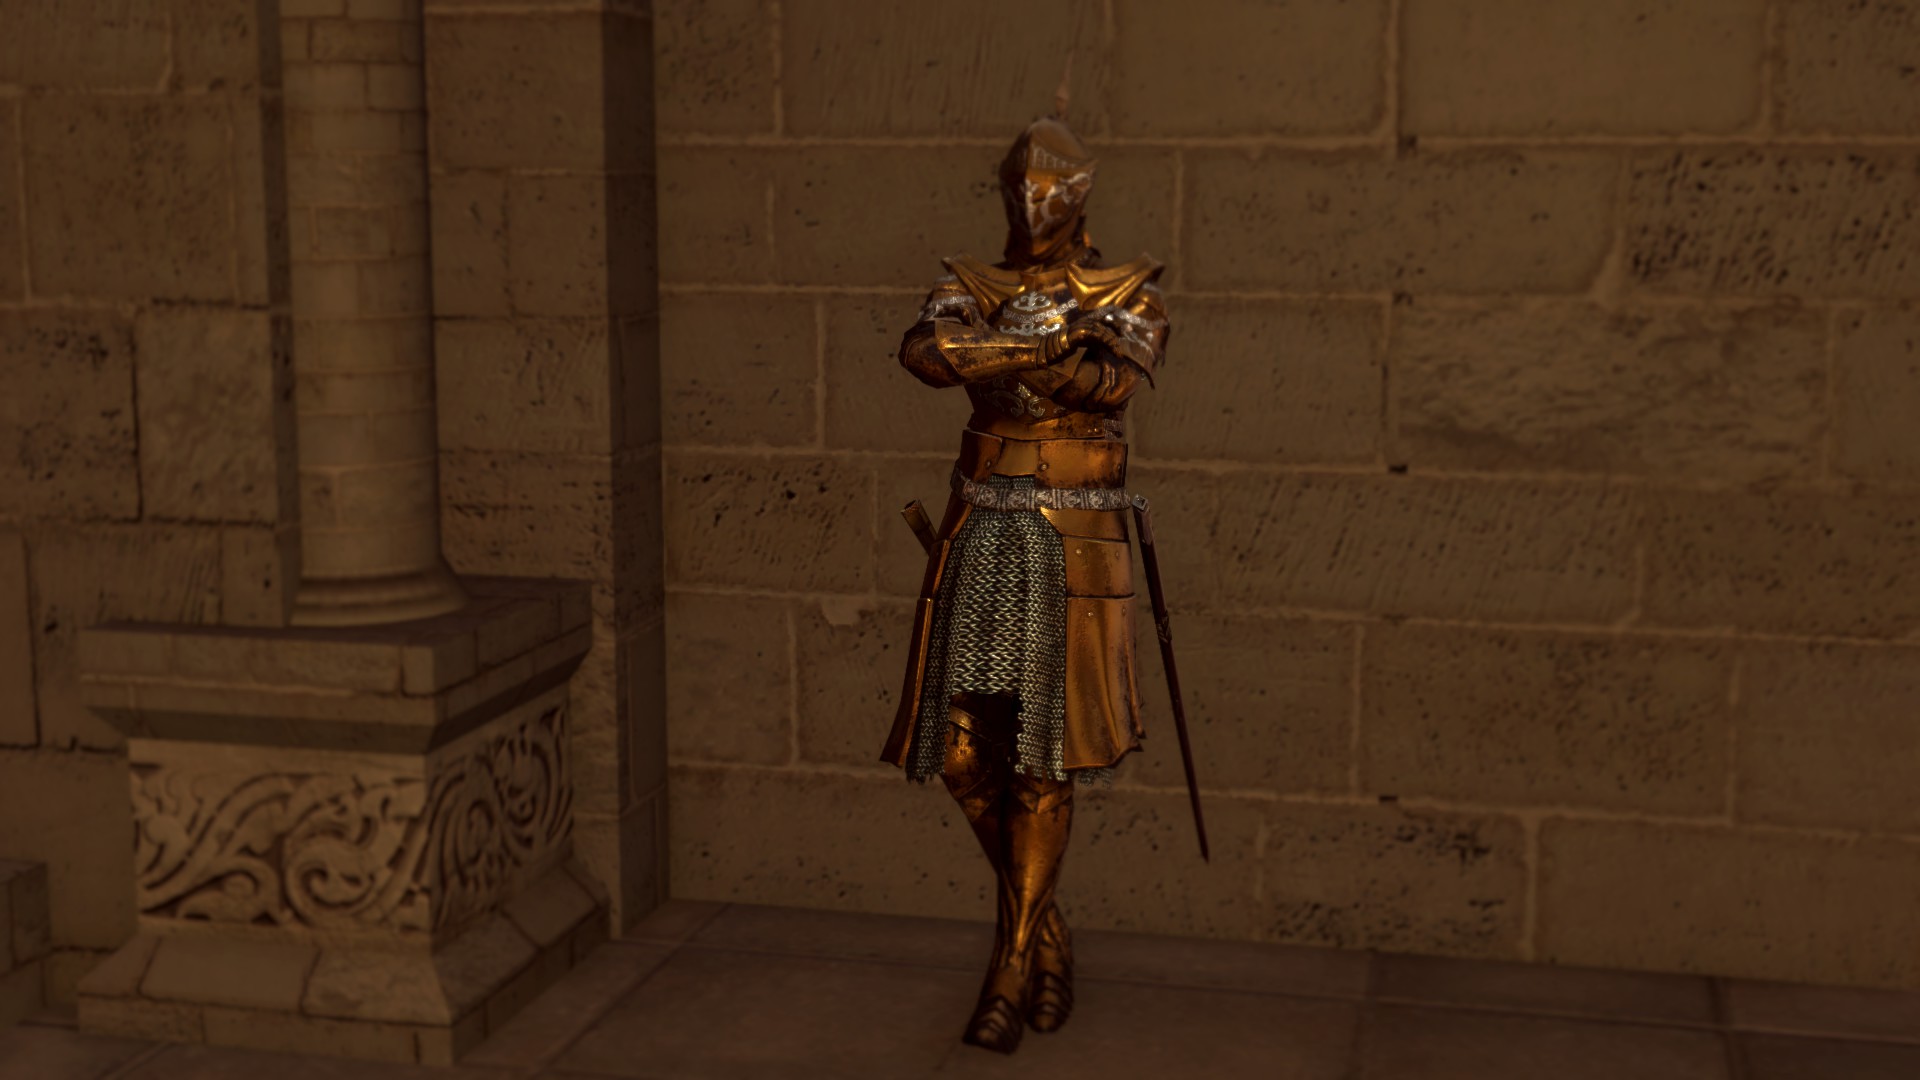 An armored figure with a sword standing against a wall, crossing their arms